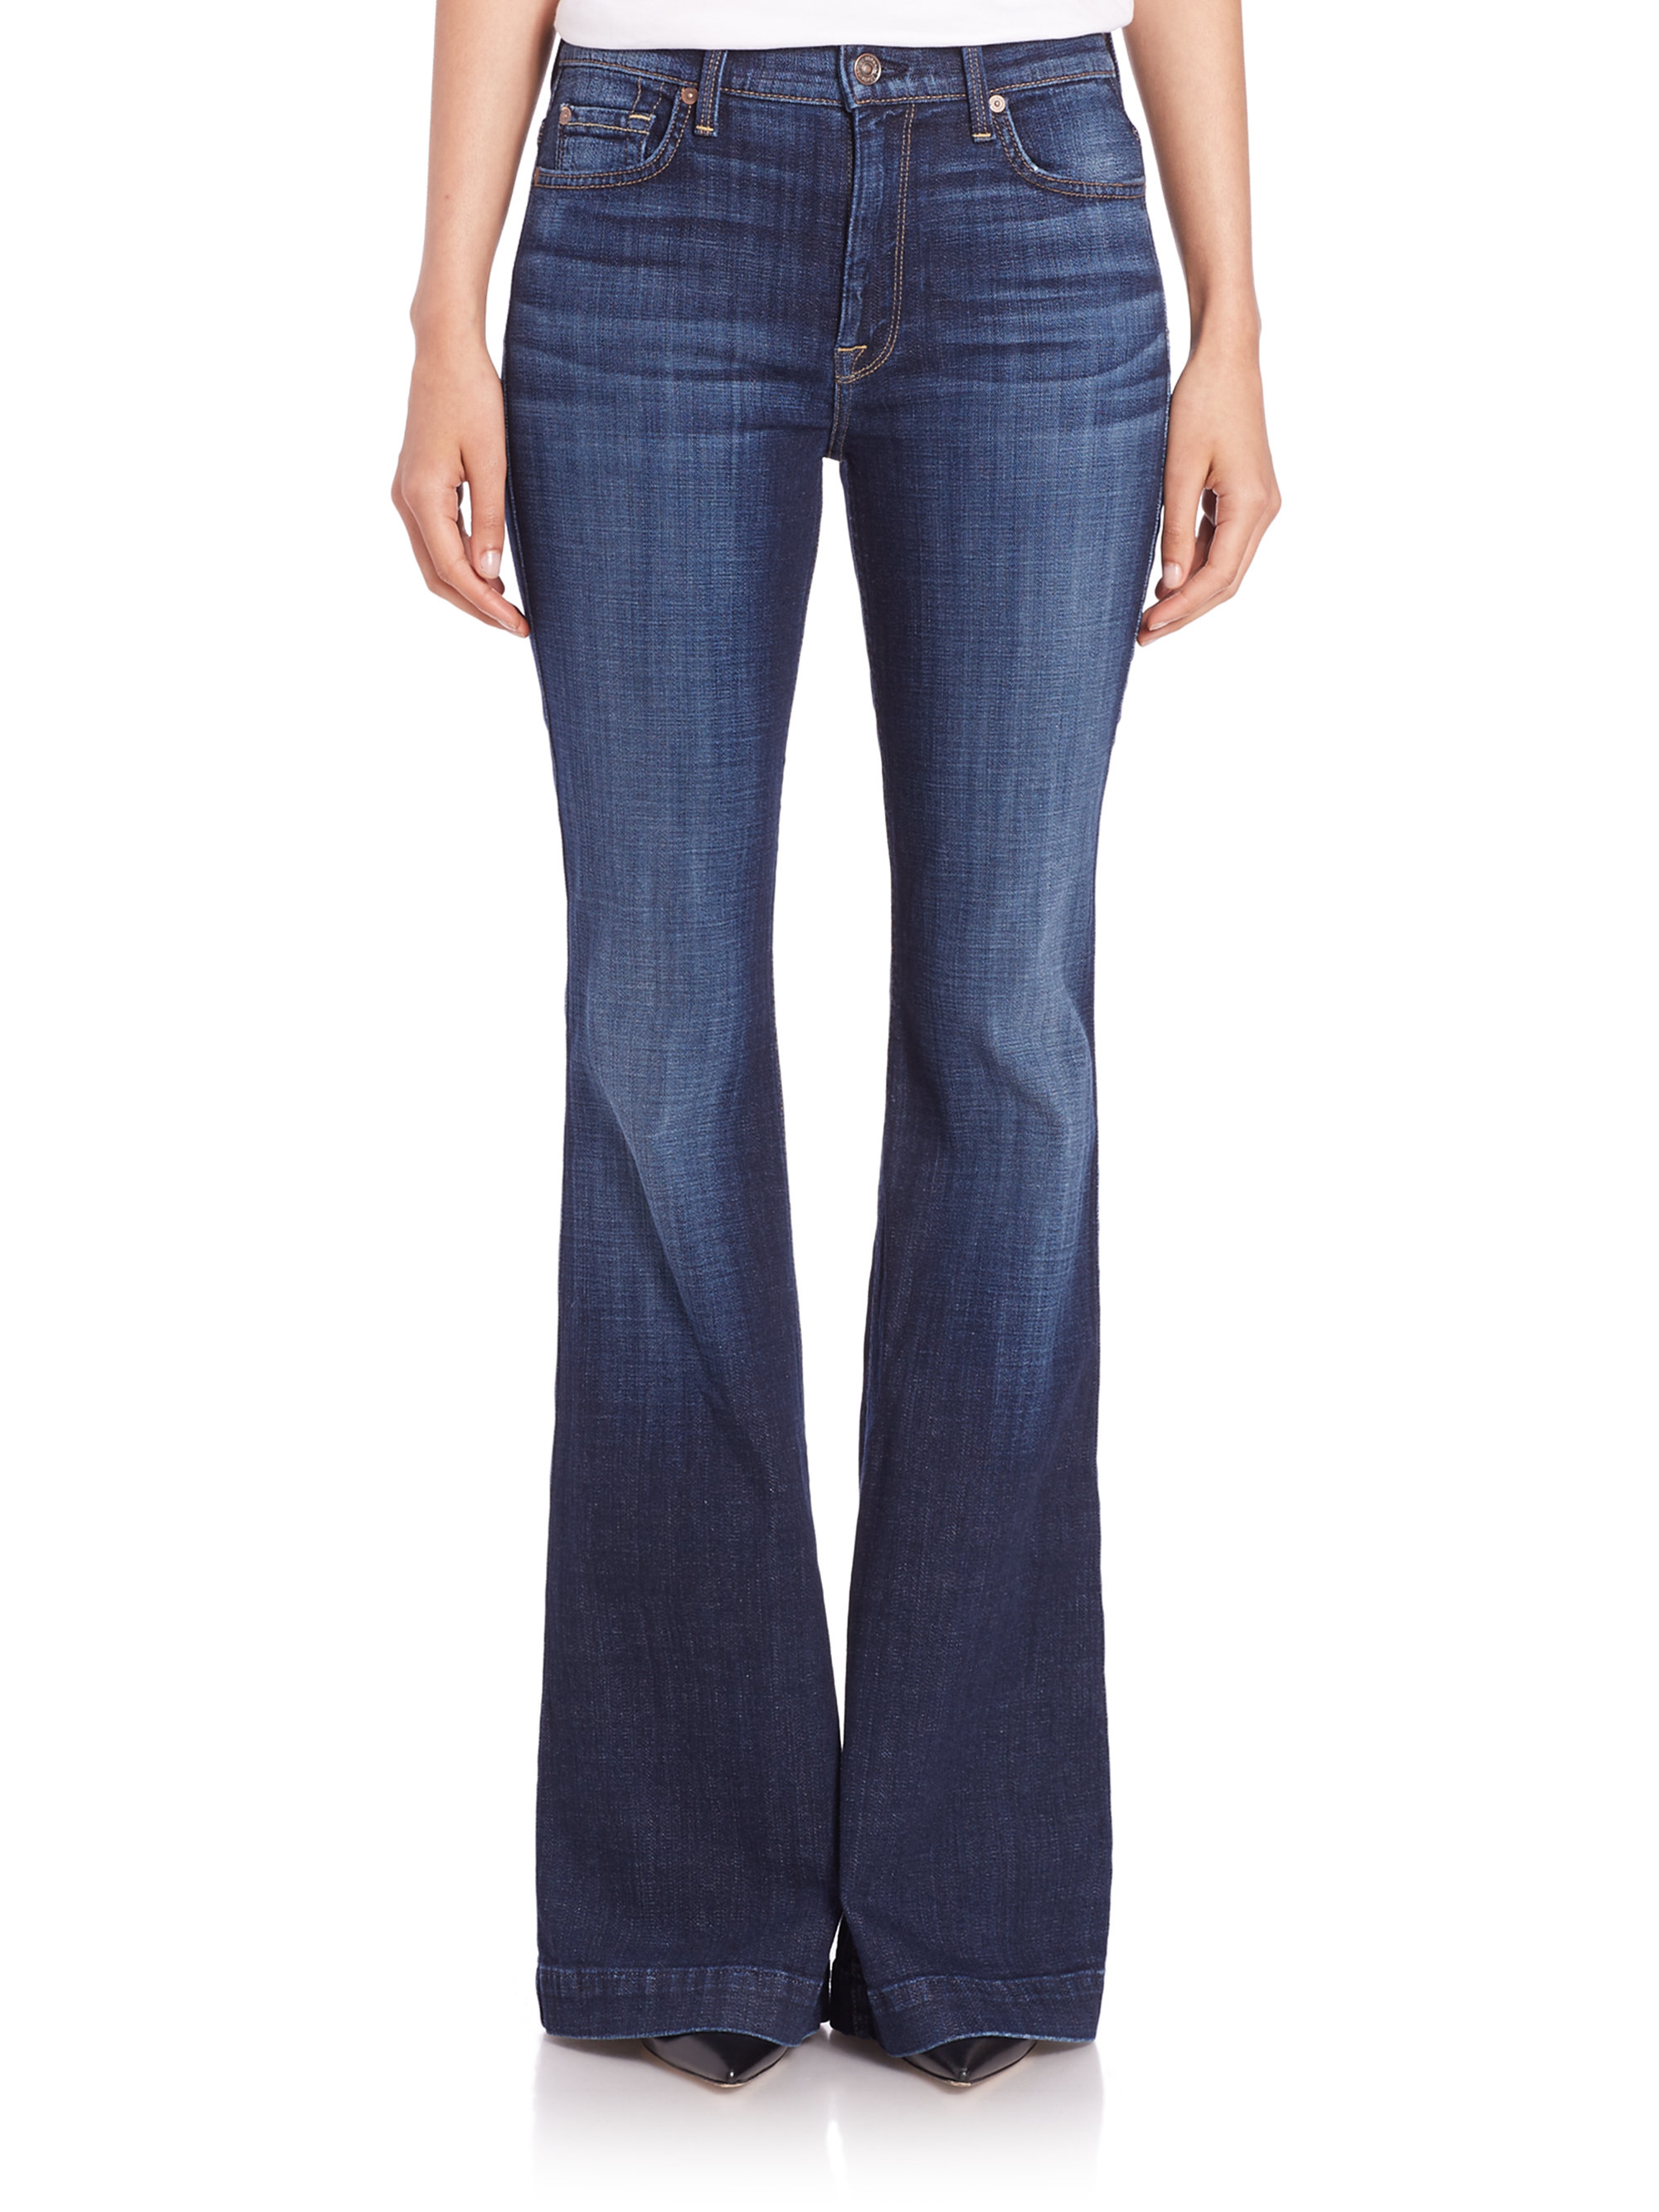 7 For All Mankind Denim Ginger Distressed Tailorless Flared Jeans in ...